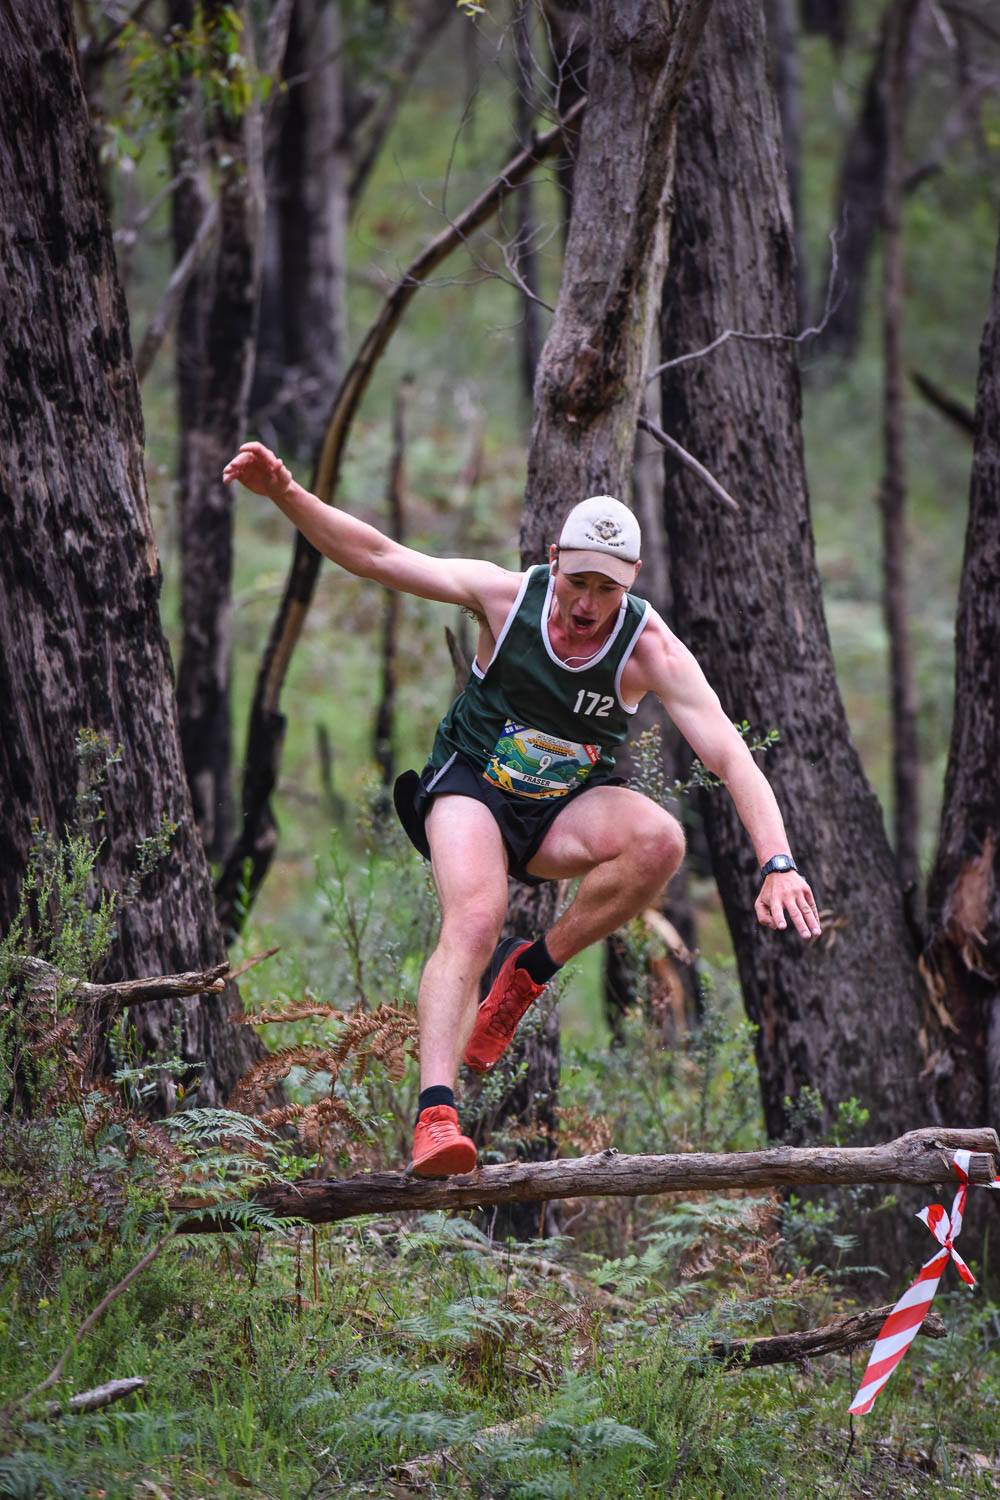 A male trail runner leaping over a fallen branch.